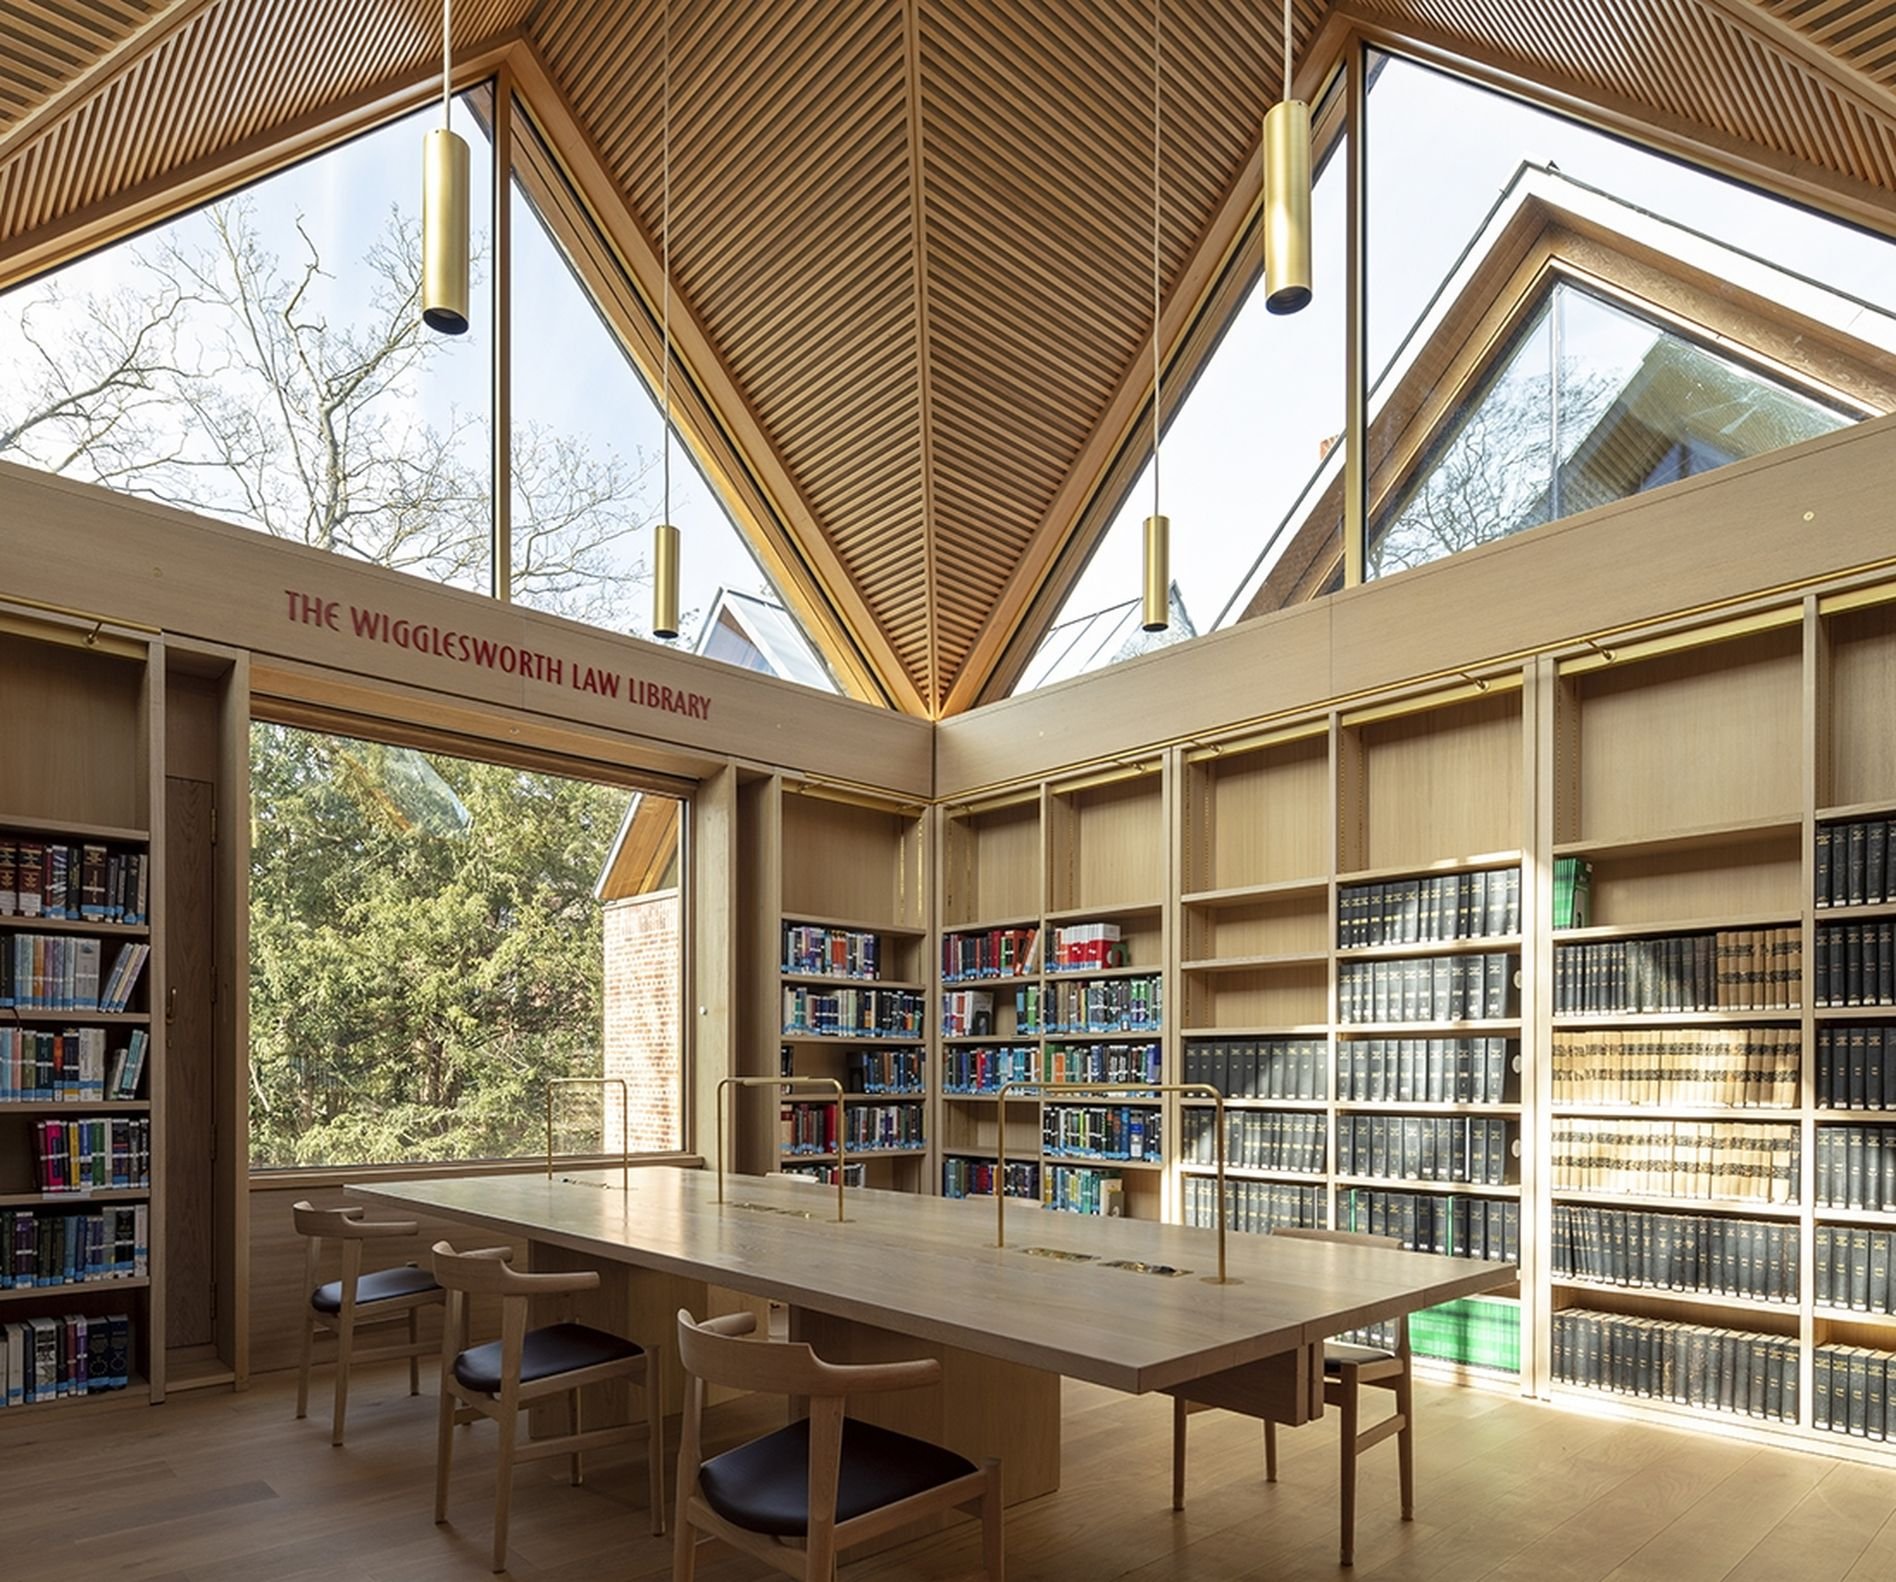 The New Library, Magdalene College. Credit images to Nick Kane